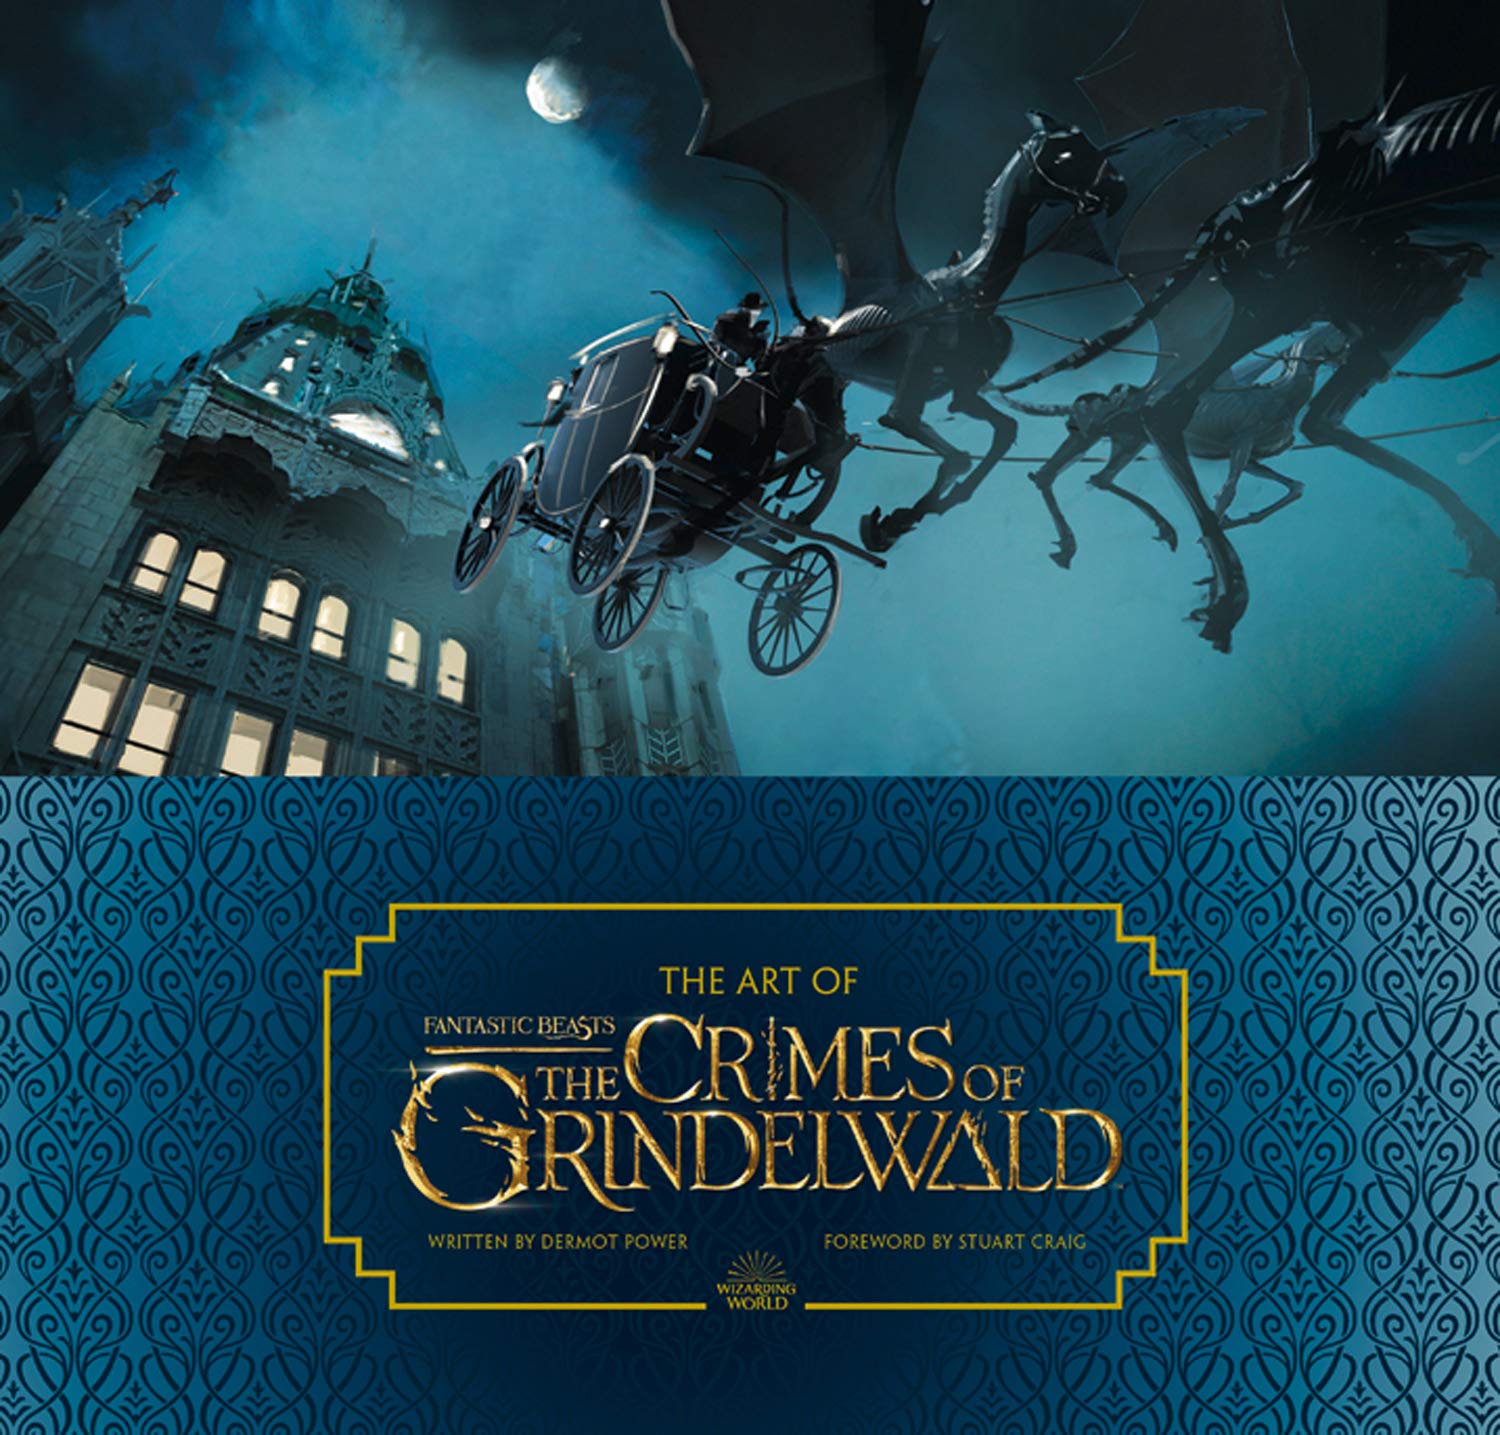 The Art of Fantastic Beasts: The Crimes of Grindelwald | Dermot Power